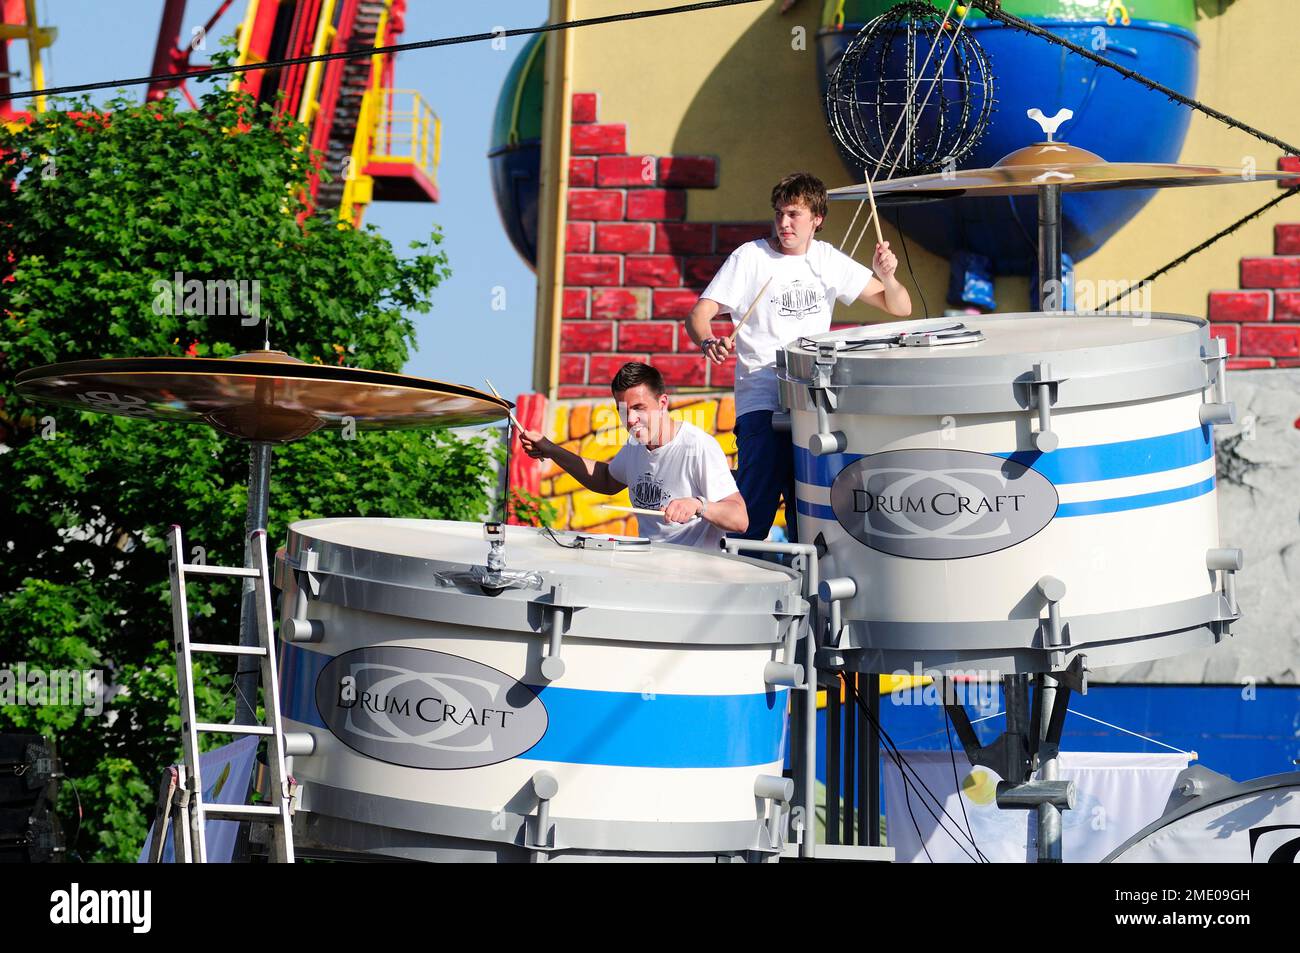 Vienna, Austria. May 1st, 2012. The biggest drum kit in the world - THE BIG BOOM - at the 1st May Festival in the Prater Stock Photo